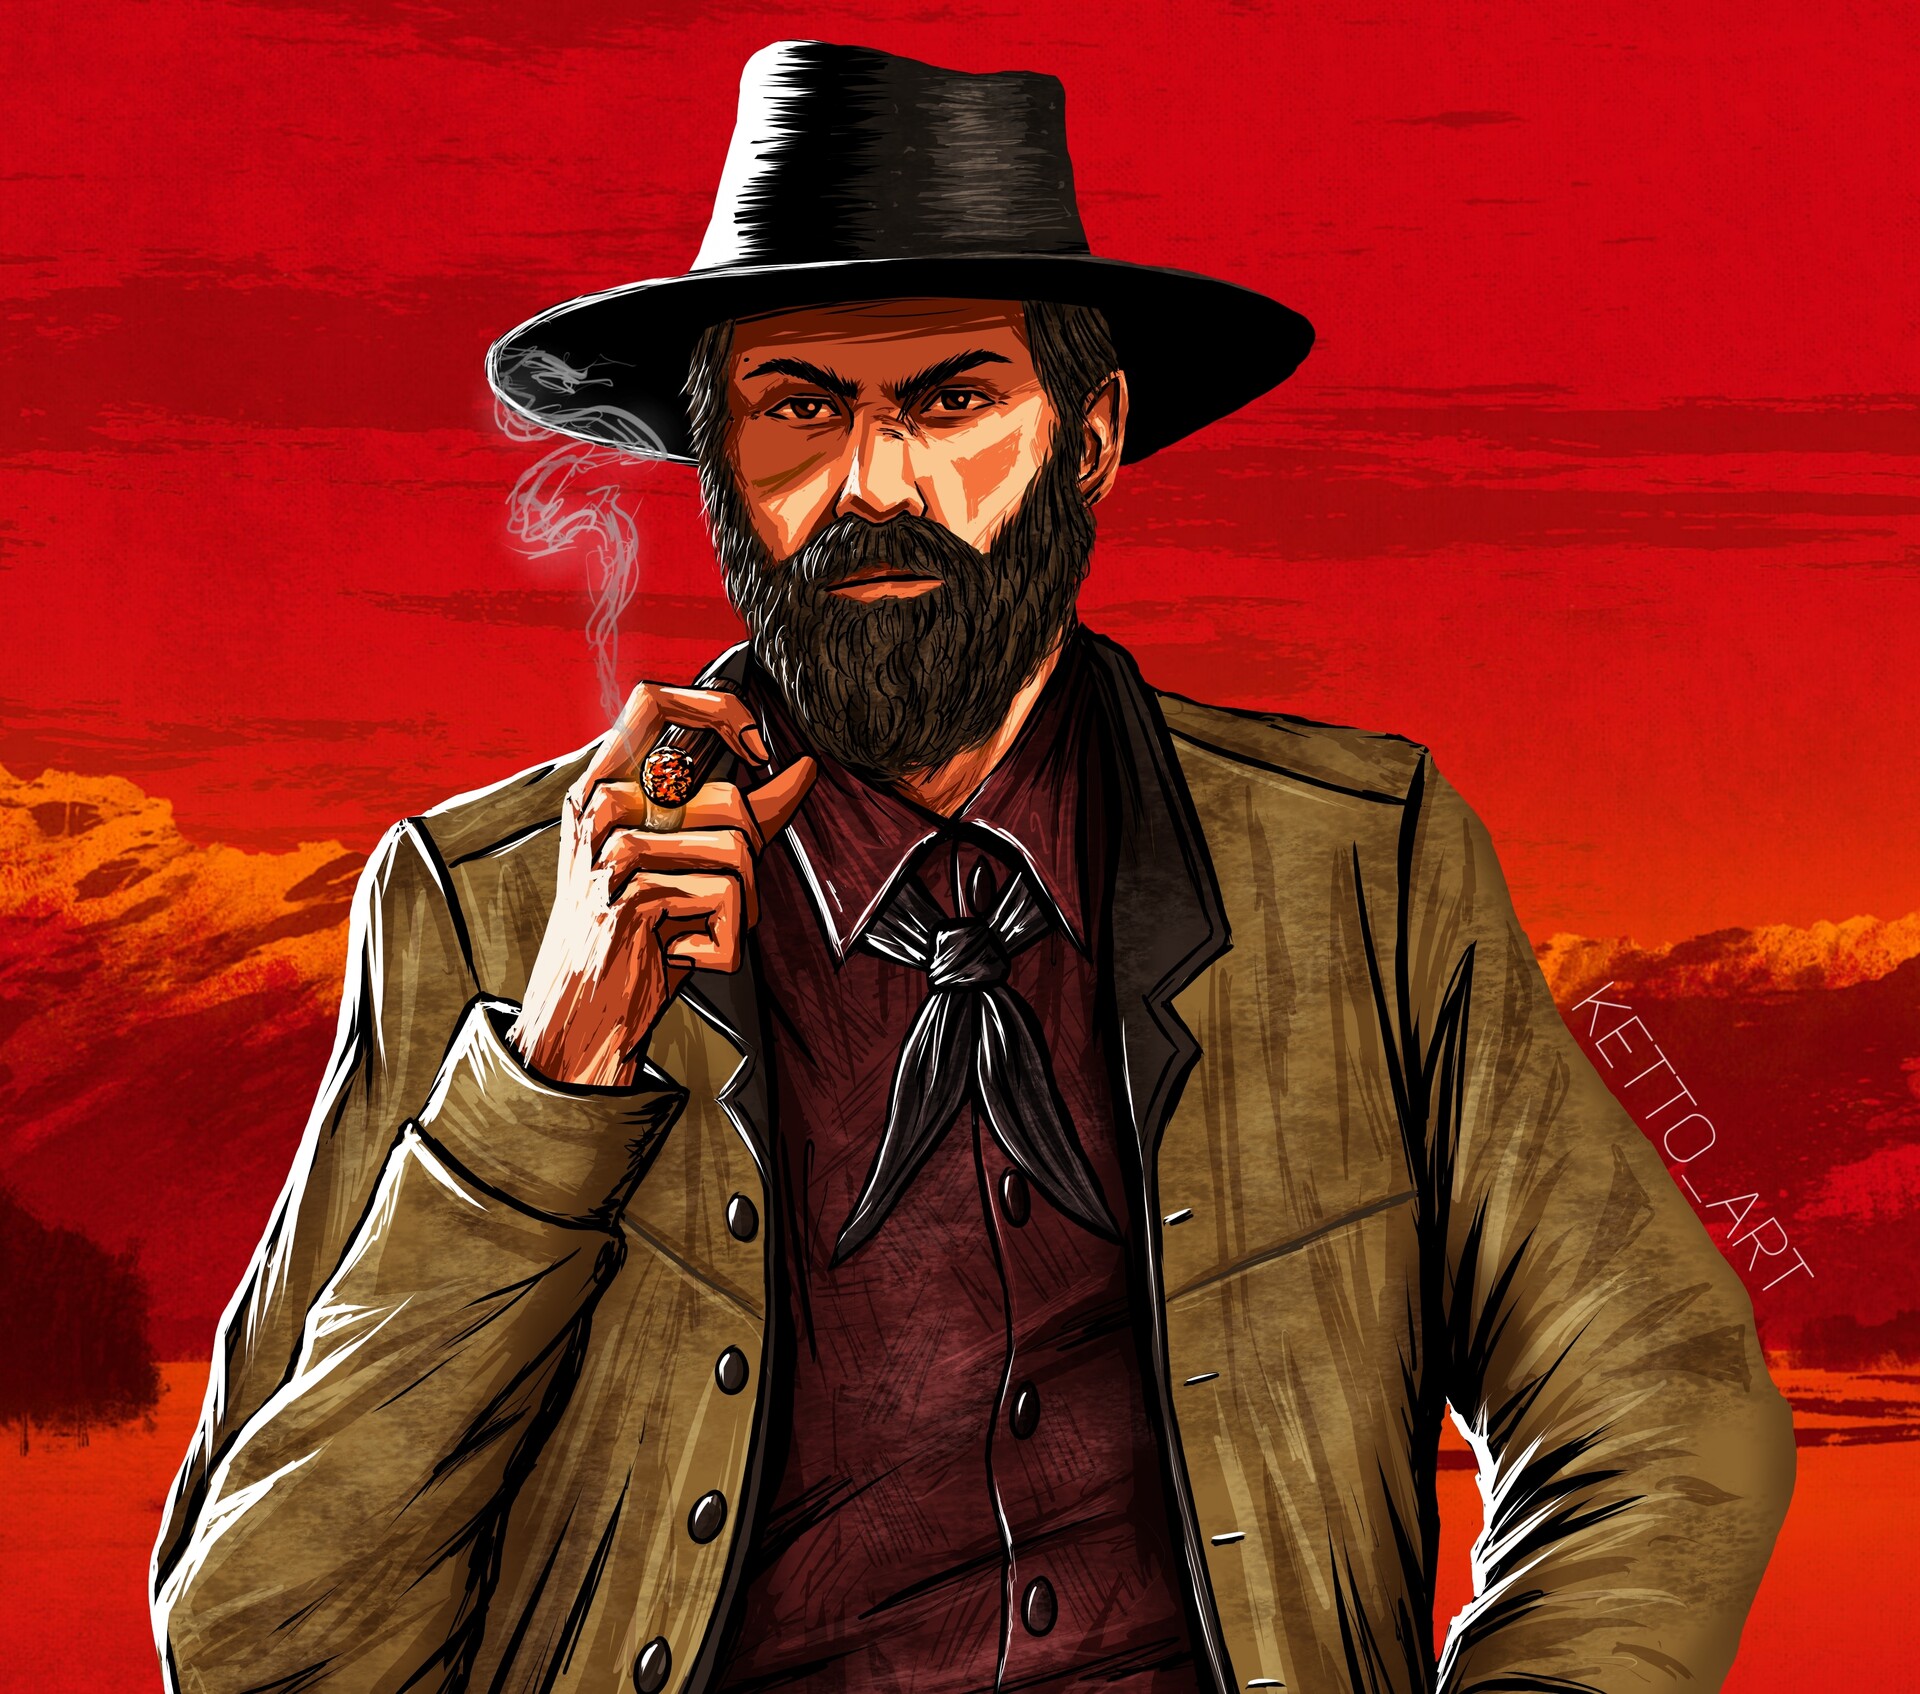 ArtStation - Red Dead Redemption Character Commission